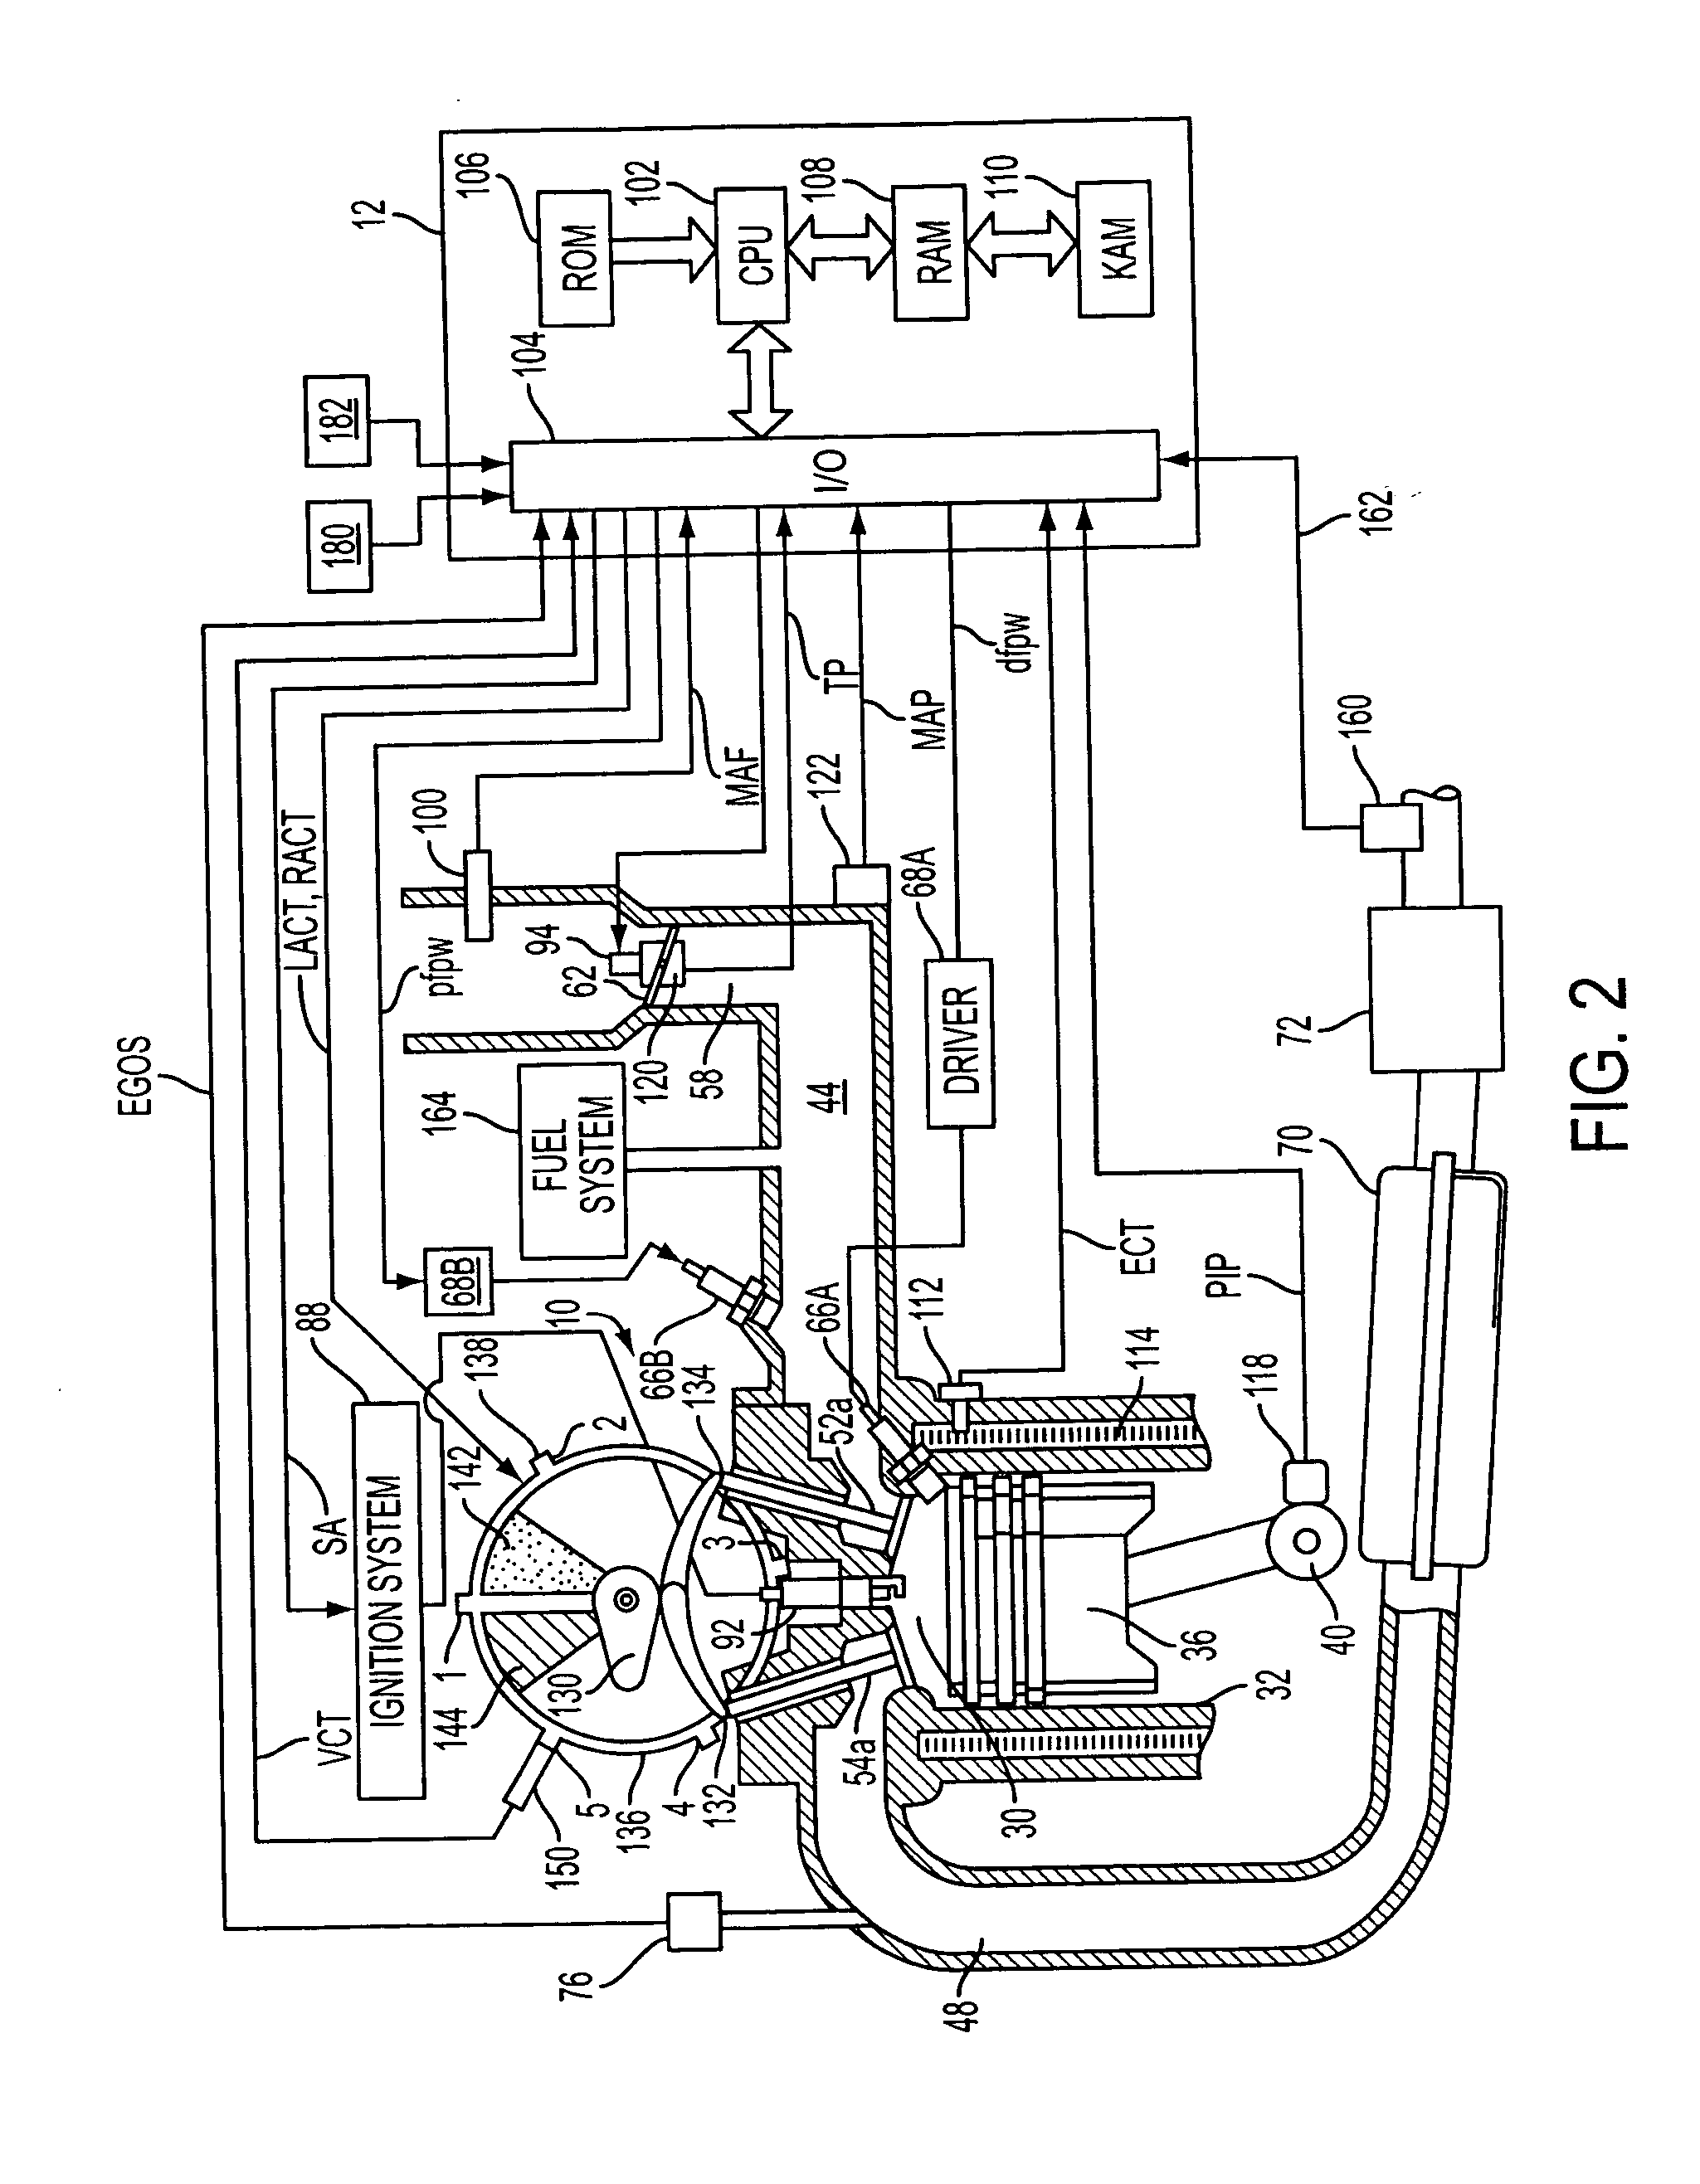 Control of peak engine output in an engine with a knock suppression fluid